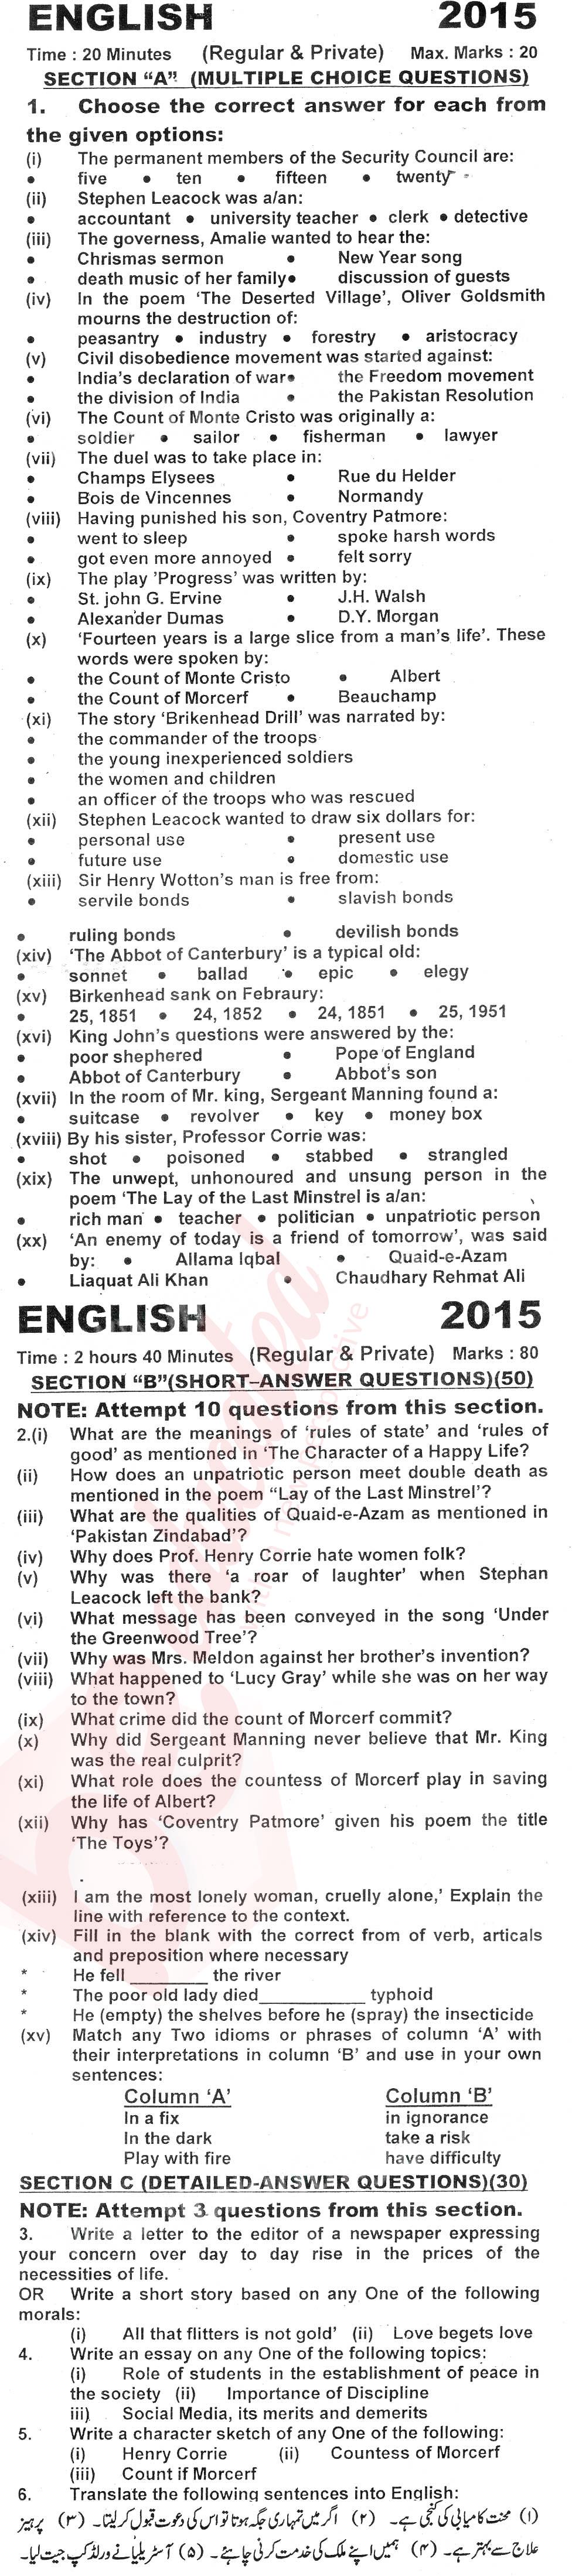 English 11th class Past Paper Group 1 KPBTE 2015